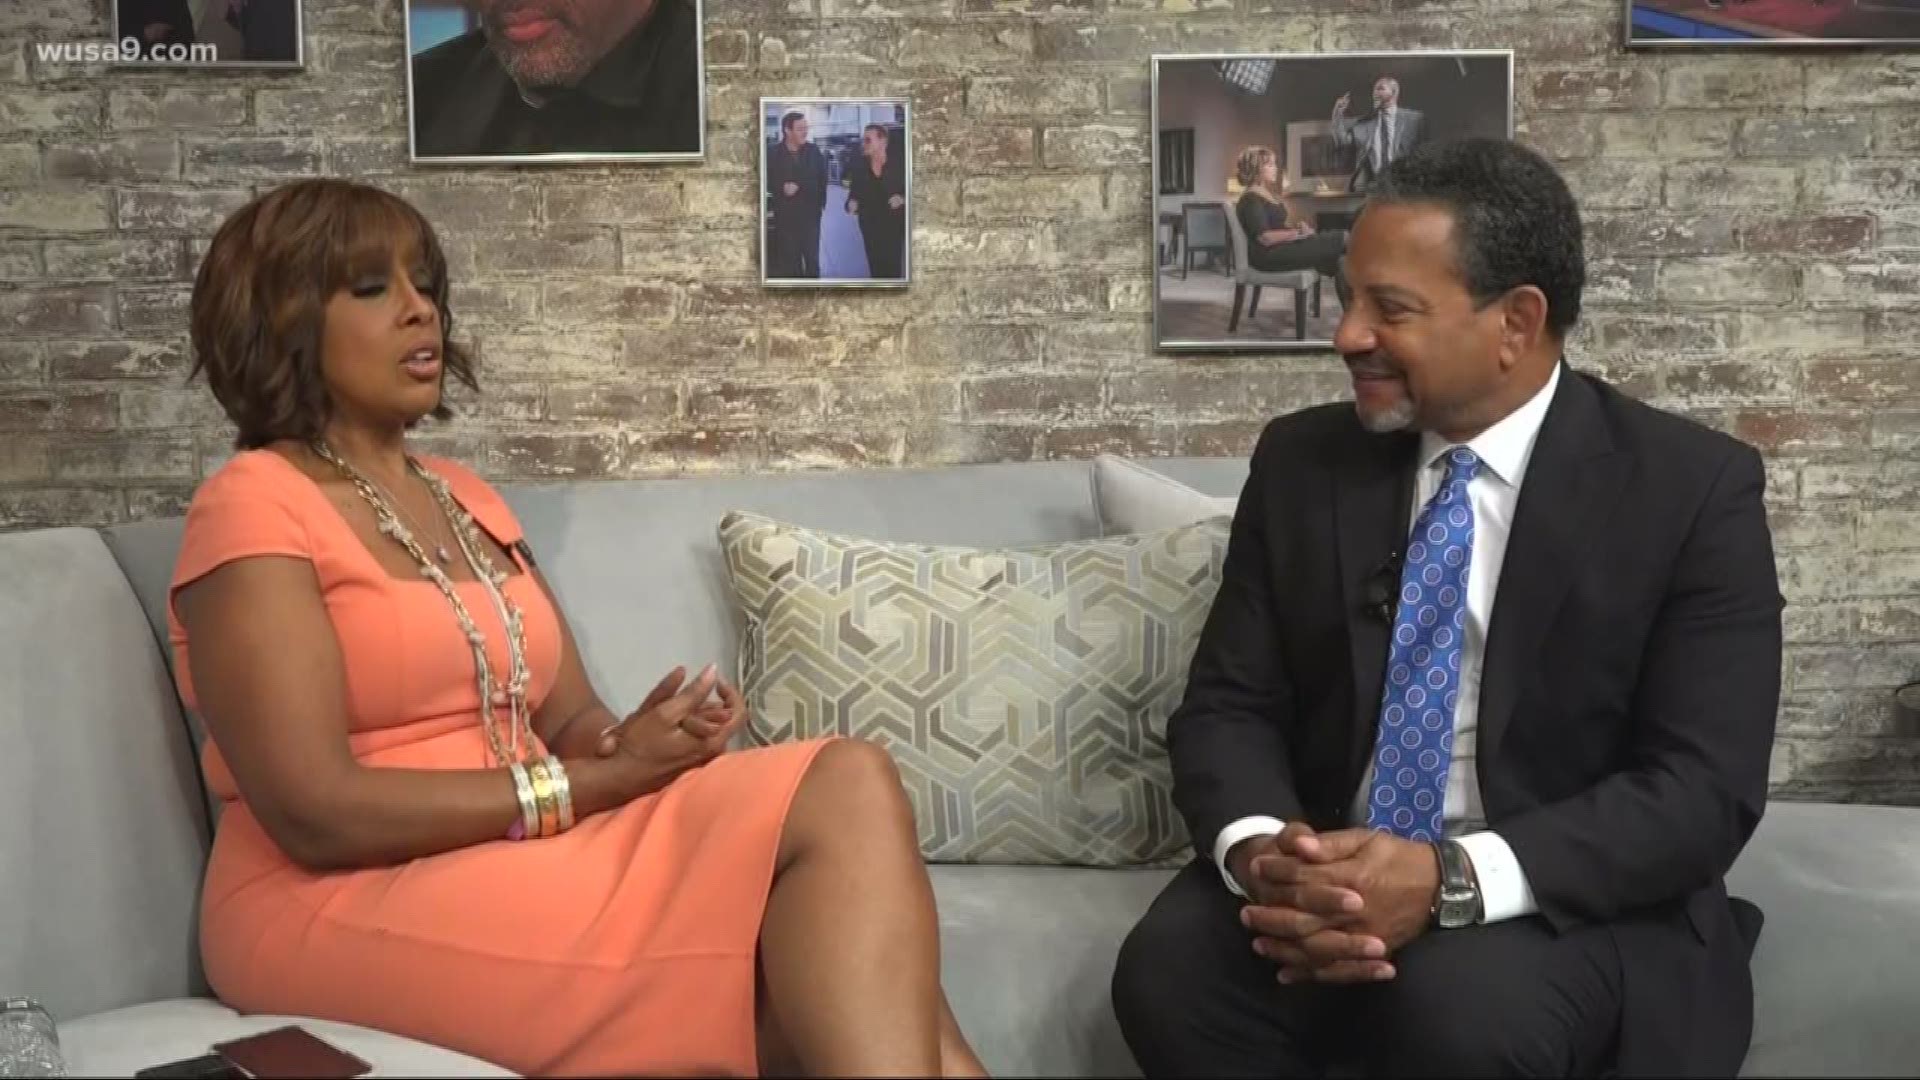 CBS This Morning co-host Gayle King sits down with her mentor Bruce Johnson and reflects on her journey as a journalist and his contributing role to her growth.